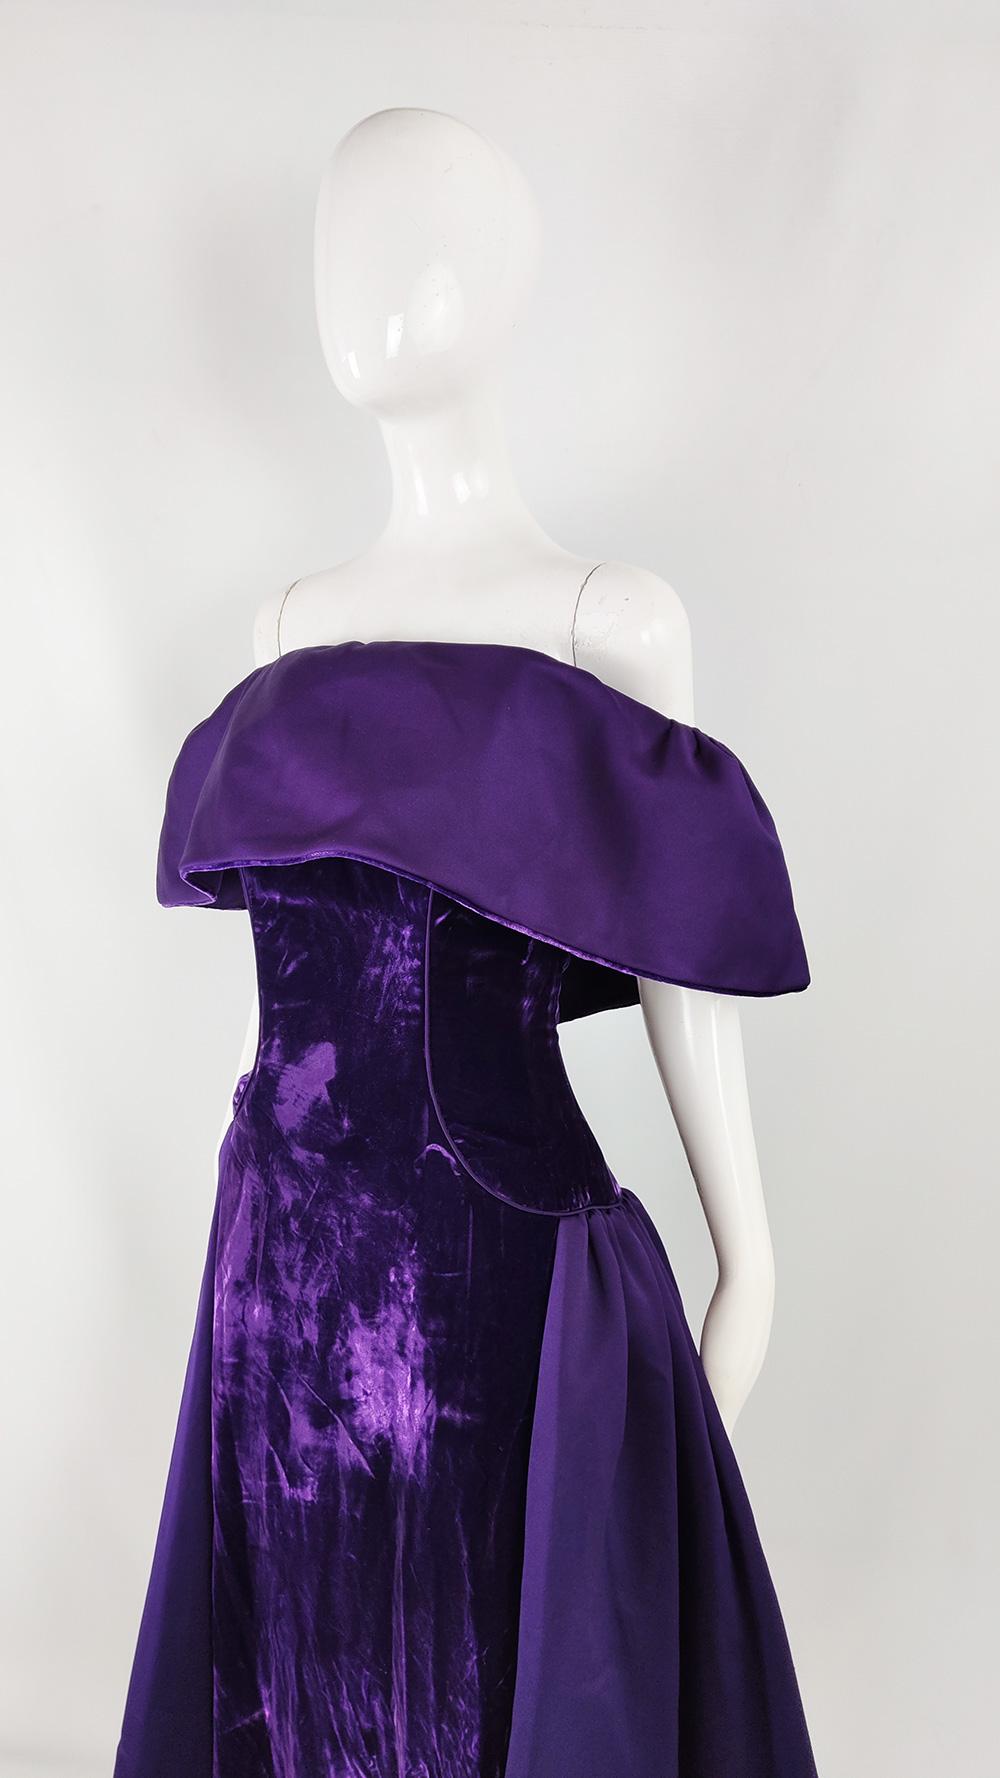 Women's Victor Costa Vintage Purple Crushed Velvet Evening Prom Ball Gown Dress, 1980s